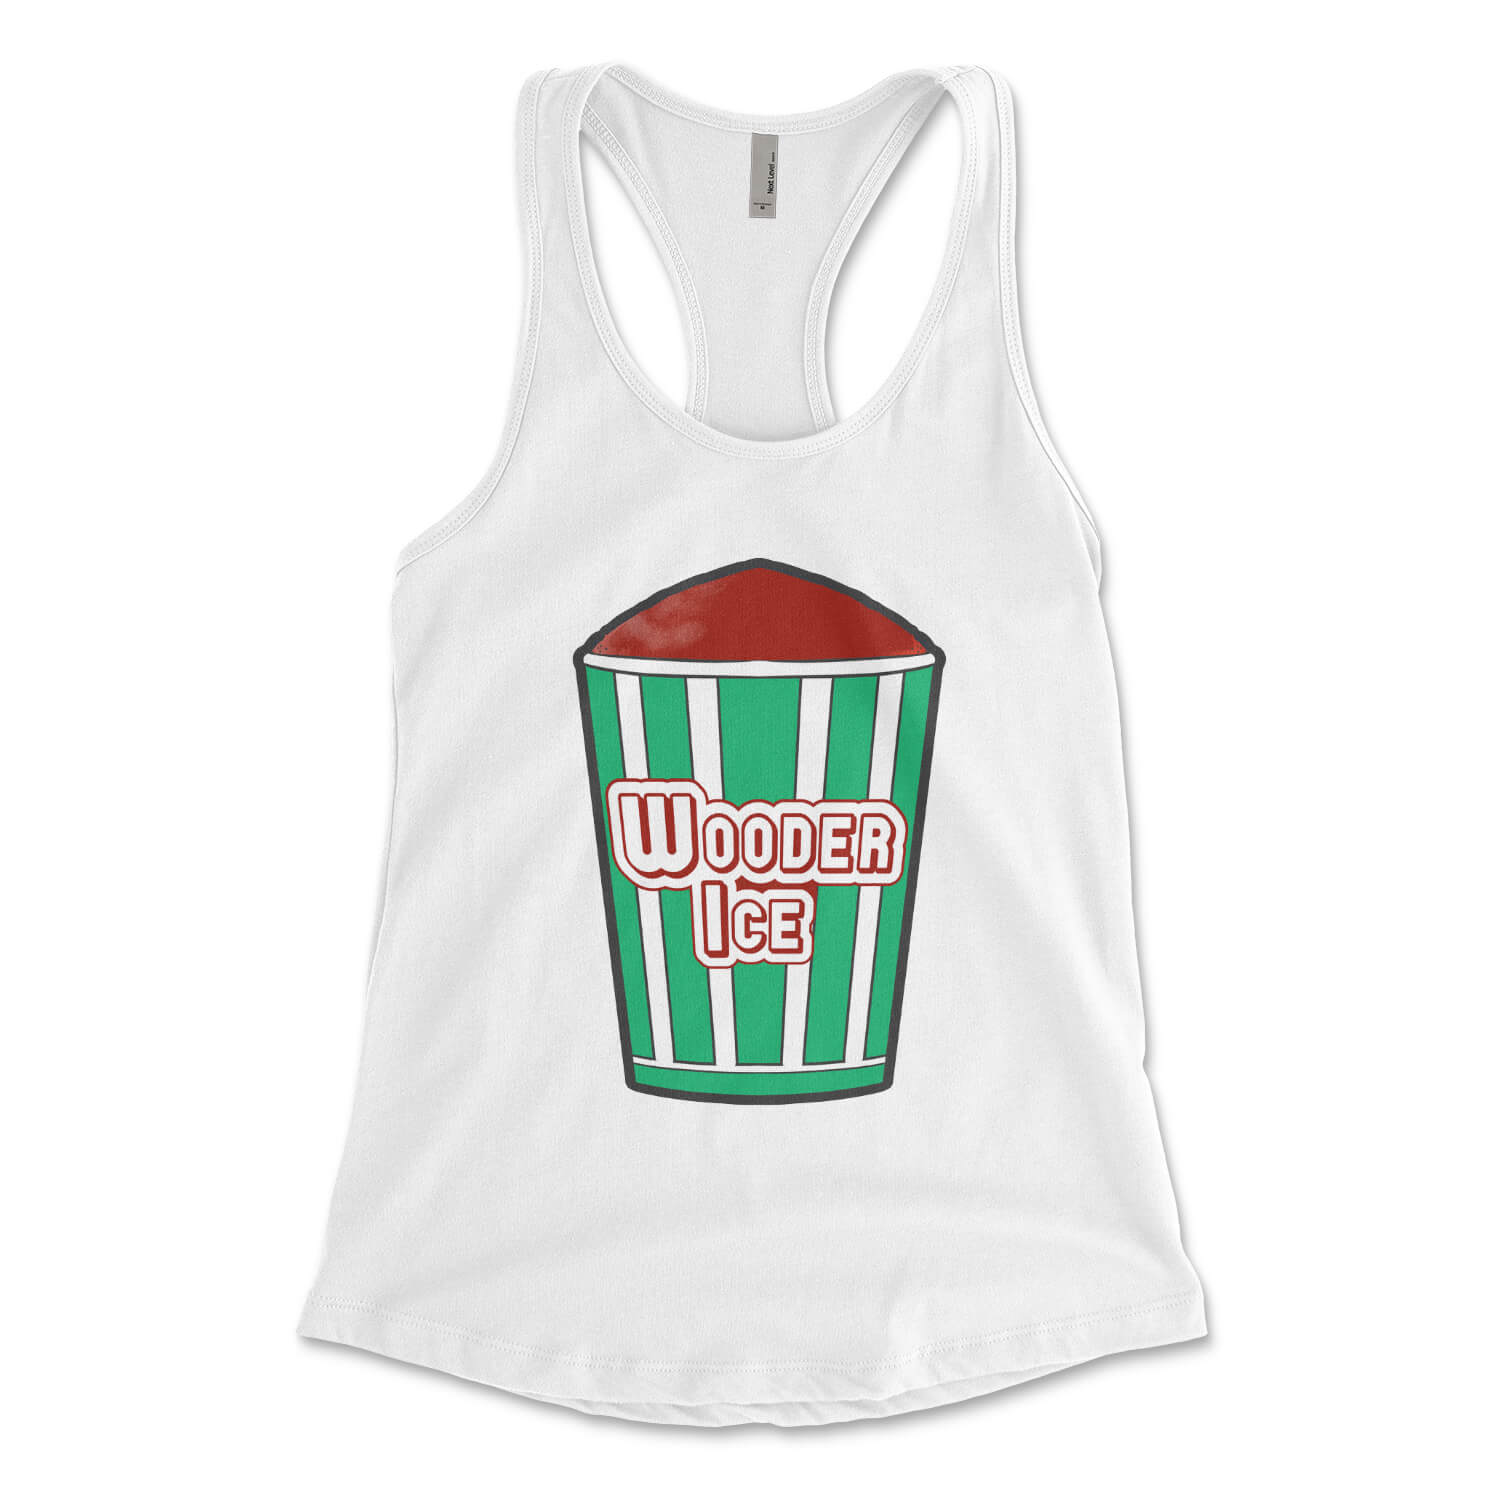 Philadelphia Philly water ice wooder ice white womens racerback tank top from Phillygoat